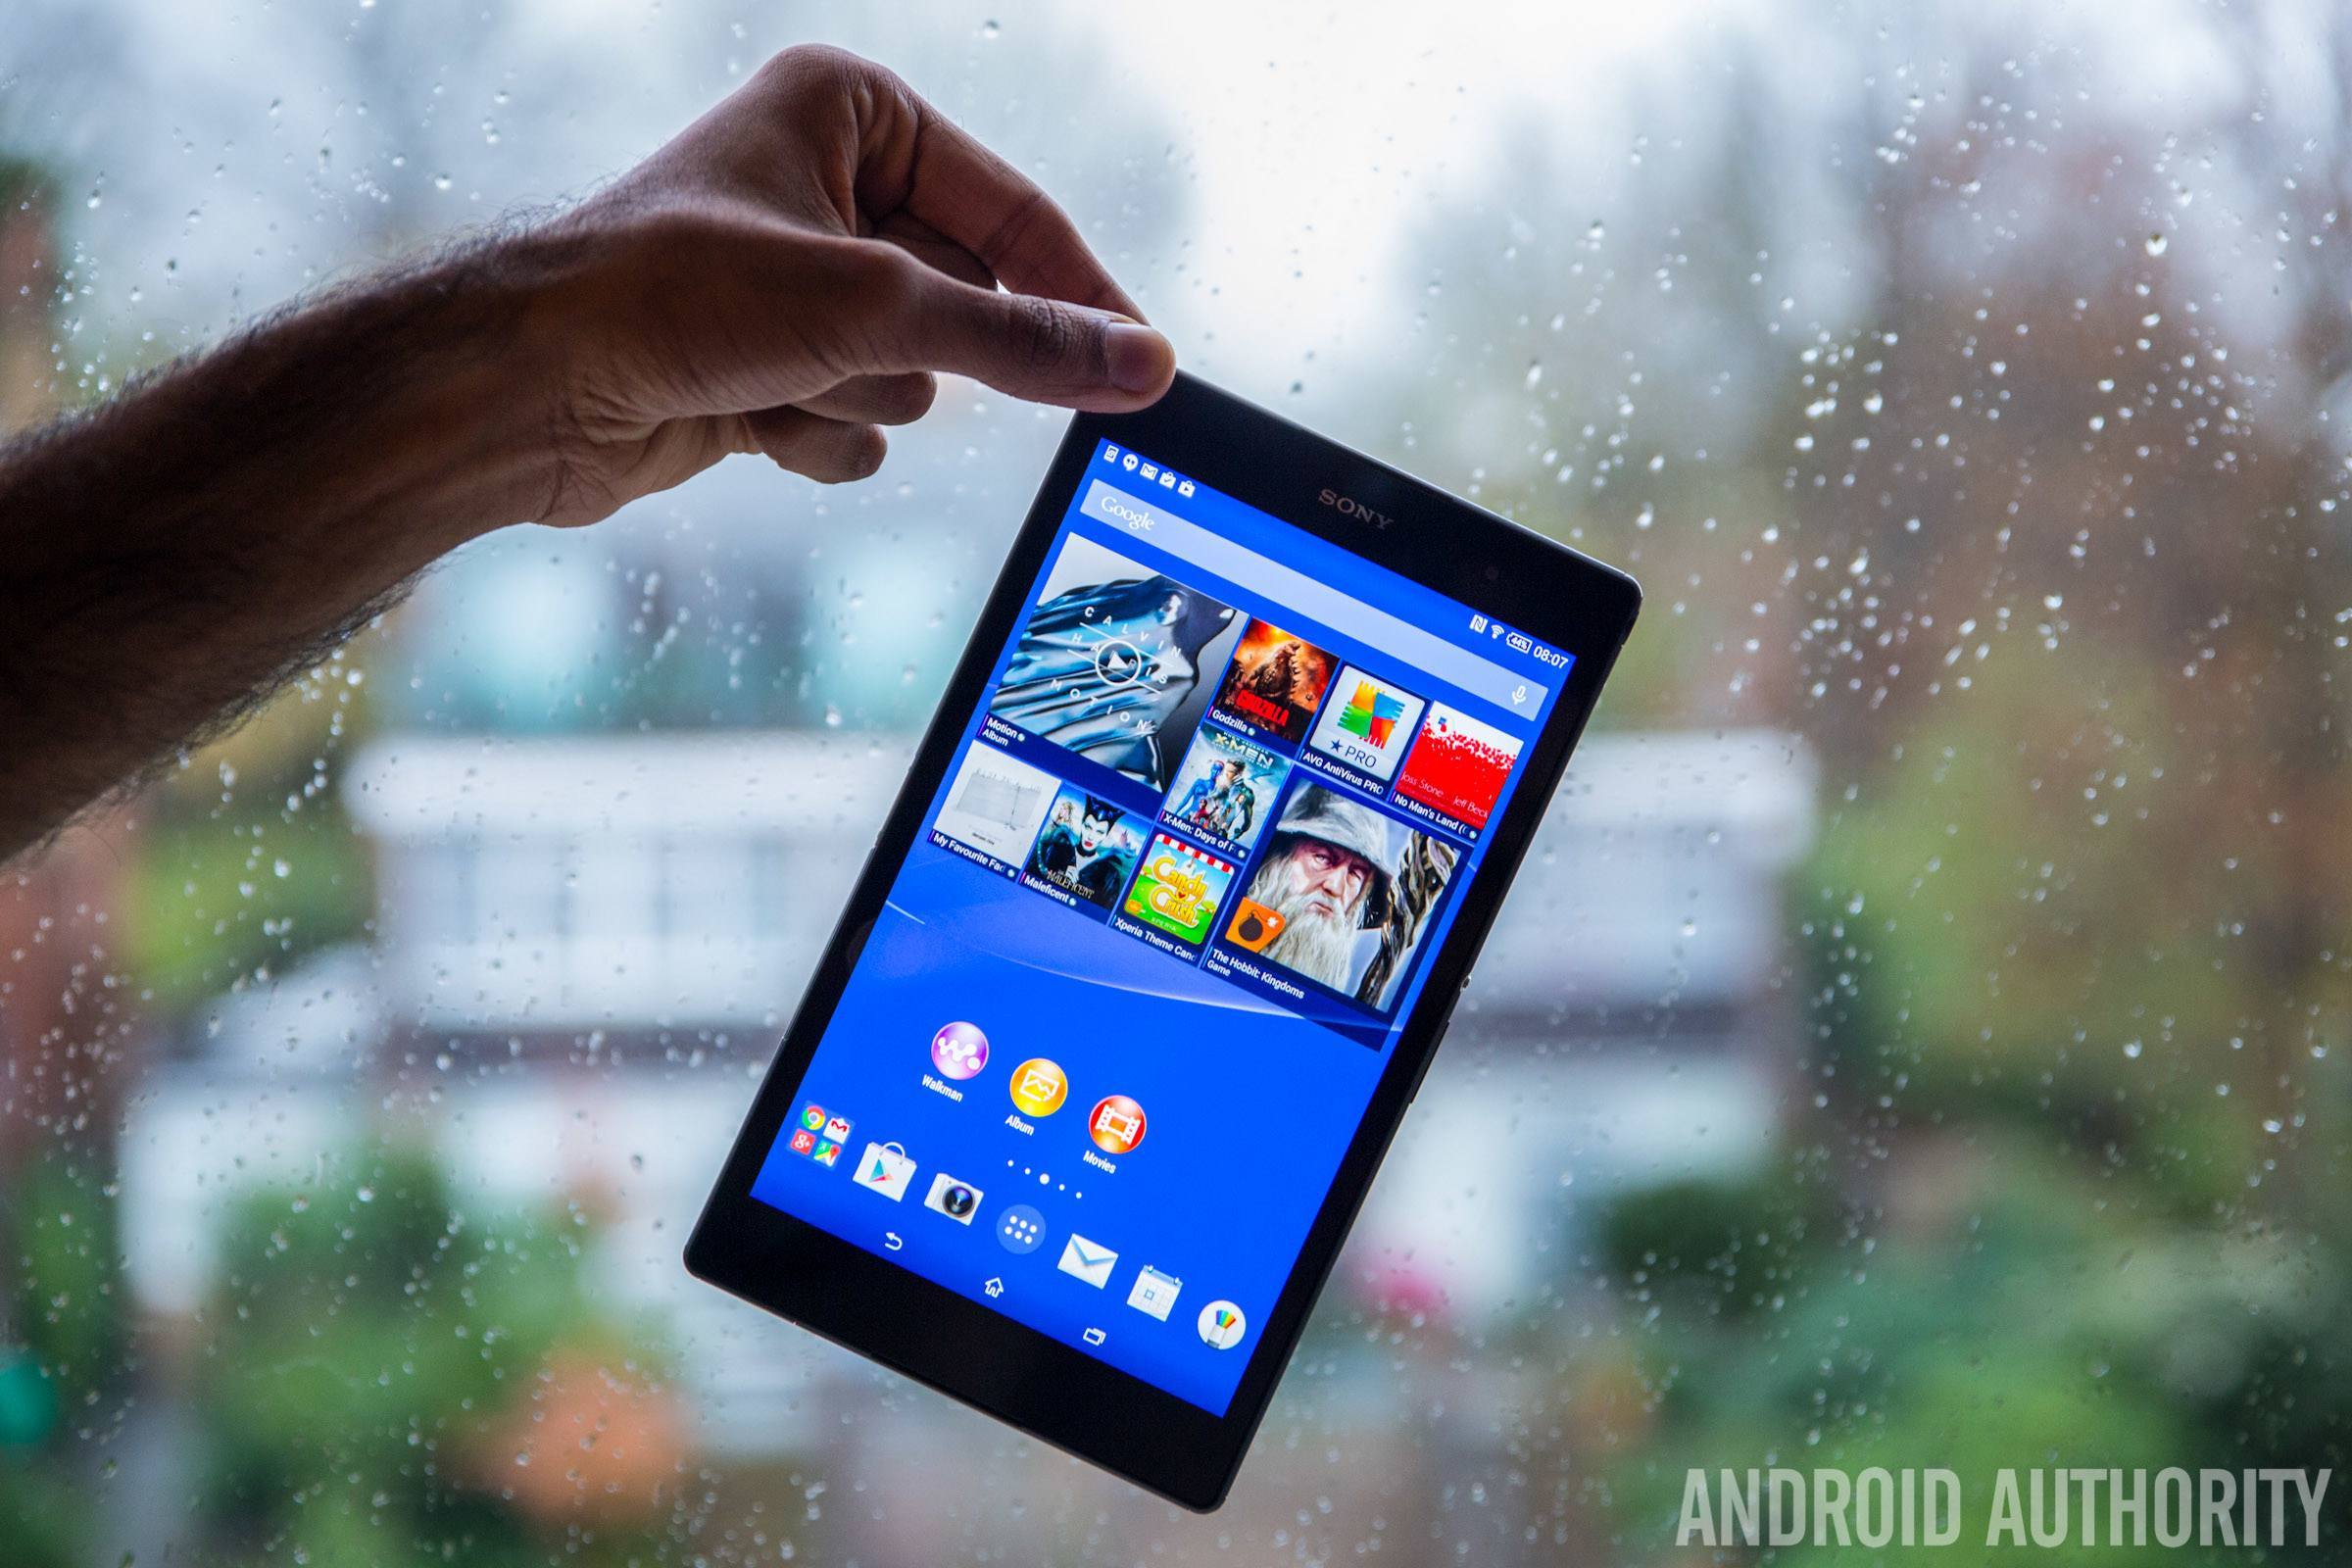 Sony Xperia Z3 Tablet Compact Review